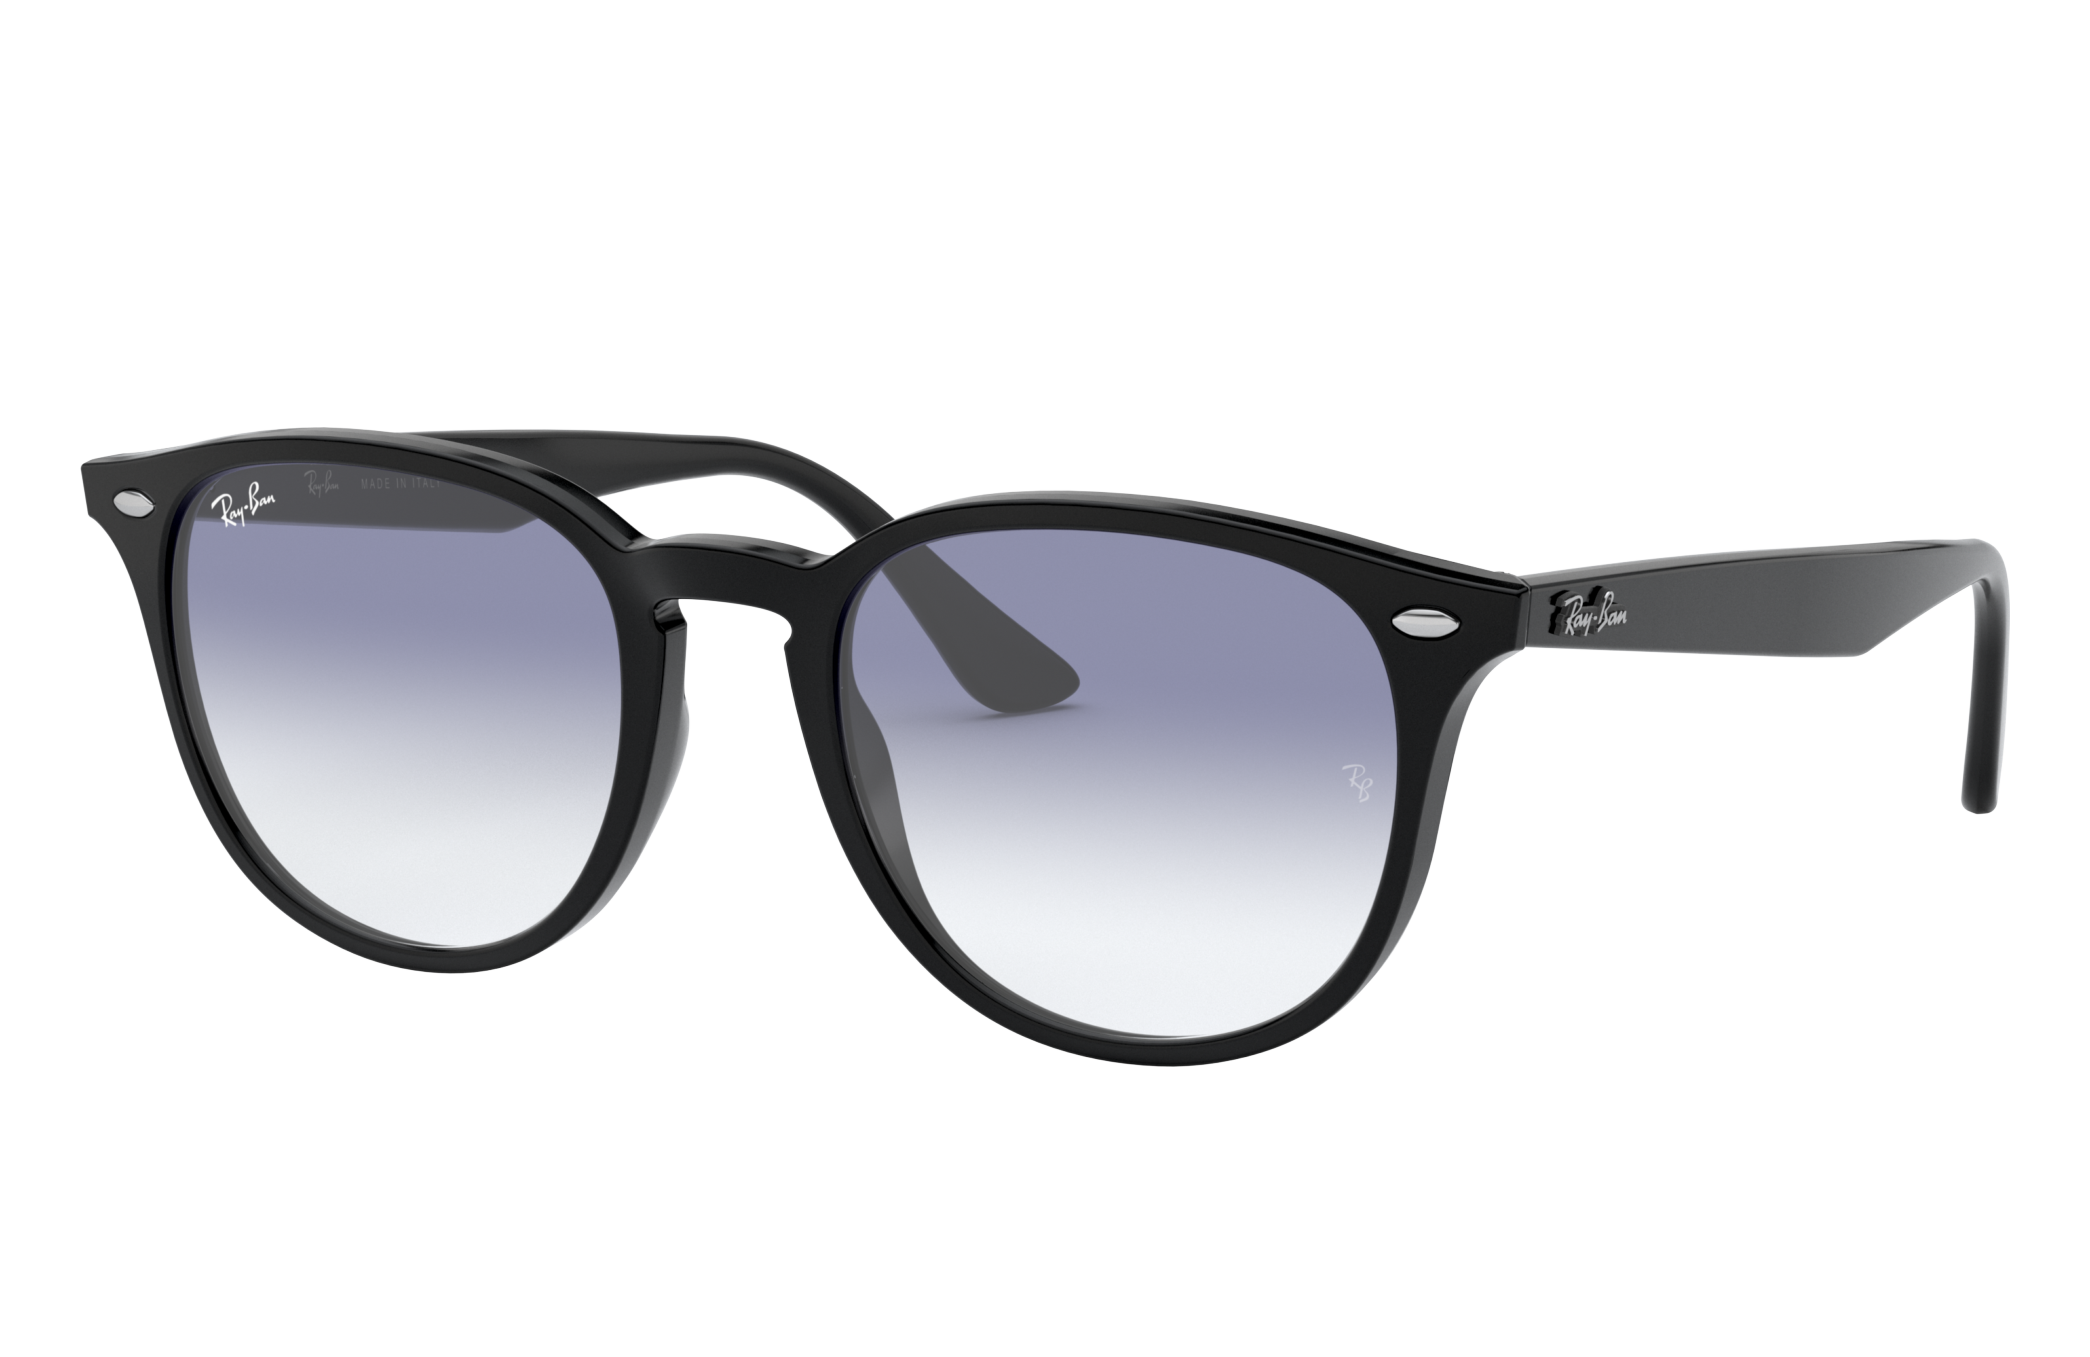 RB Sunglasses in Black and Light Blue   RB   Ray Ban® US